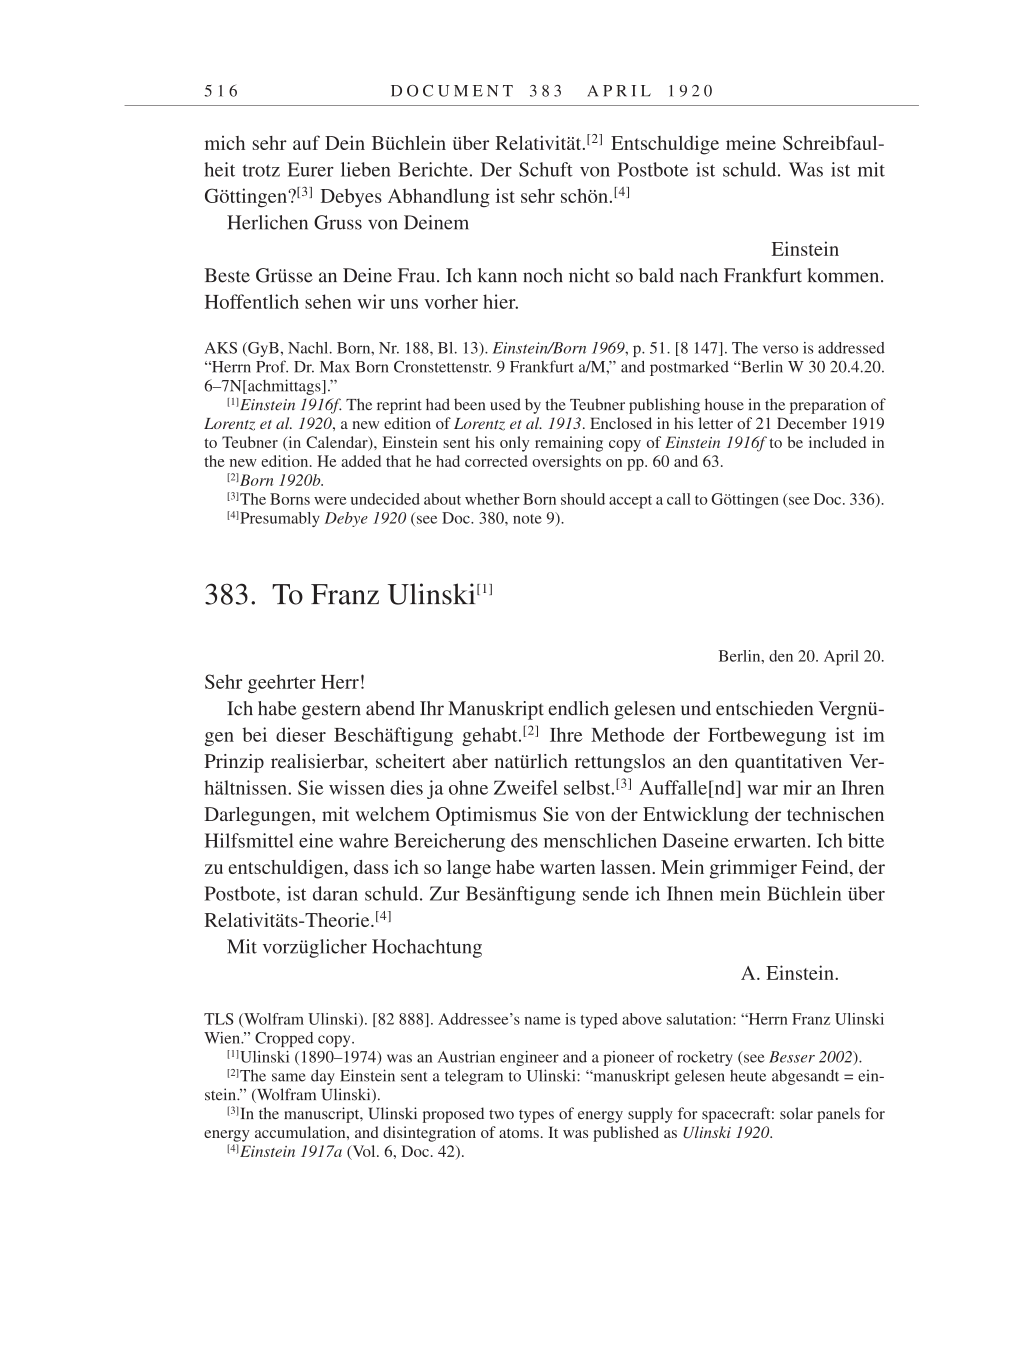 Volume 9: The Berlin Years: Correspondence January 1919-April 1920 page 516